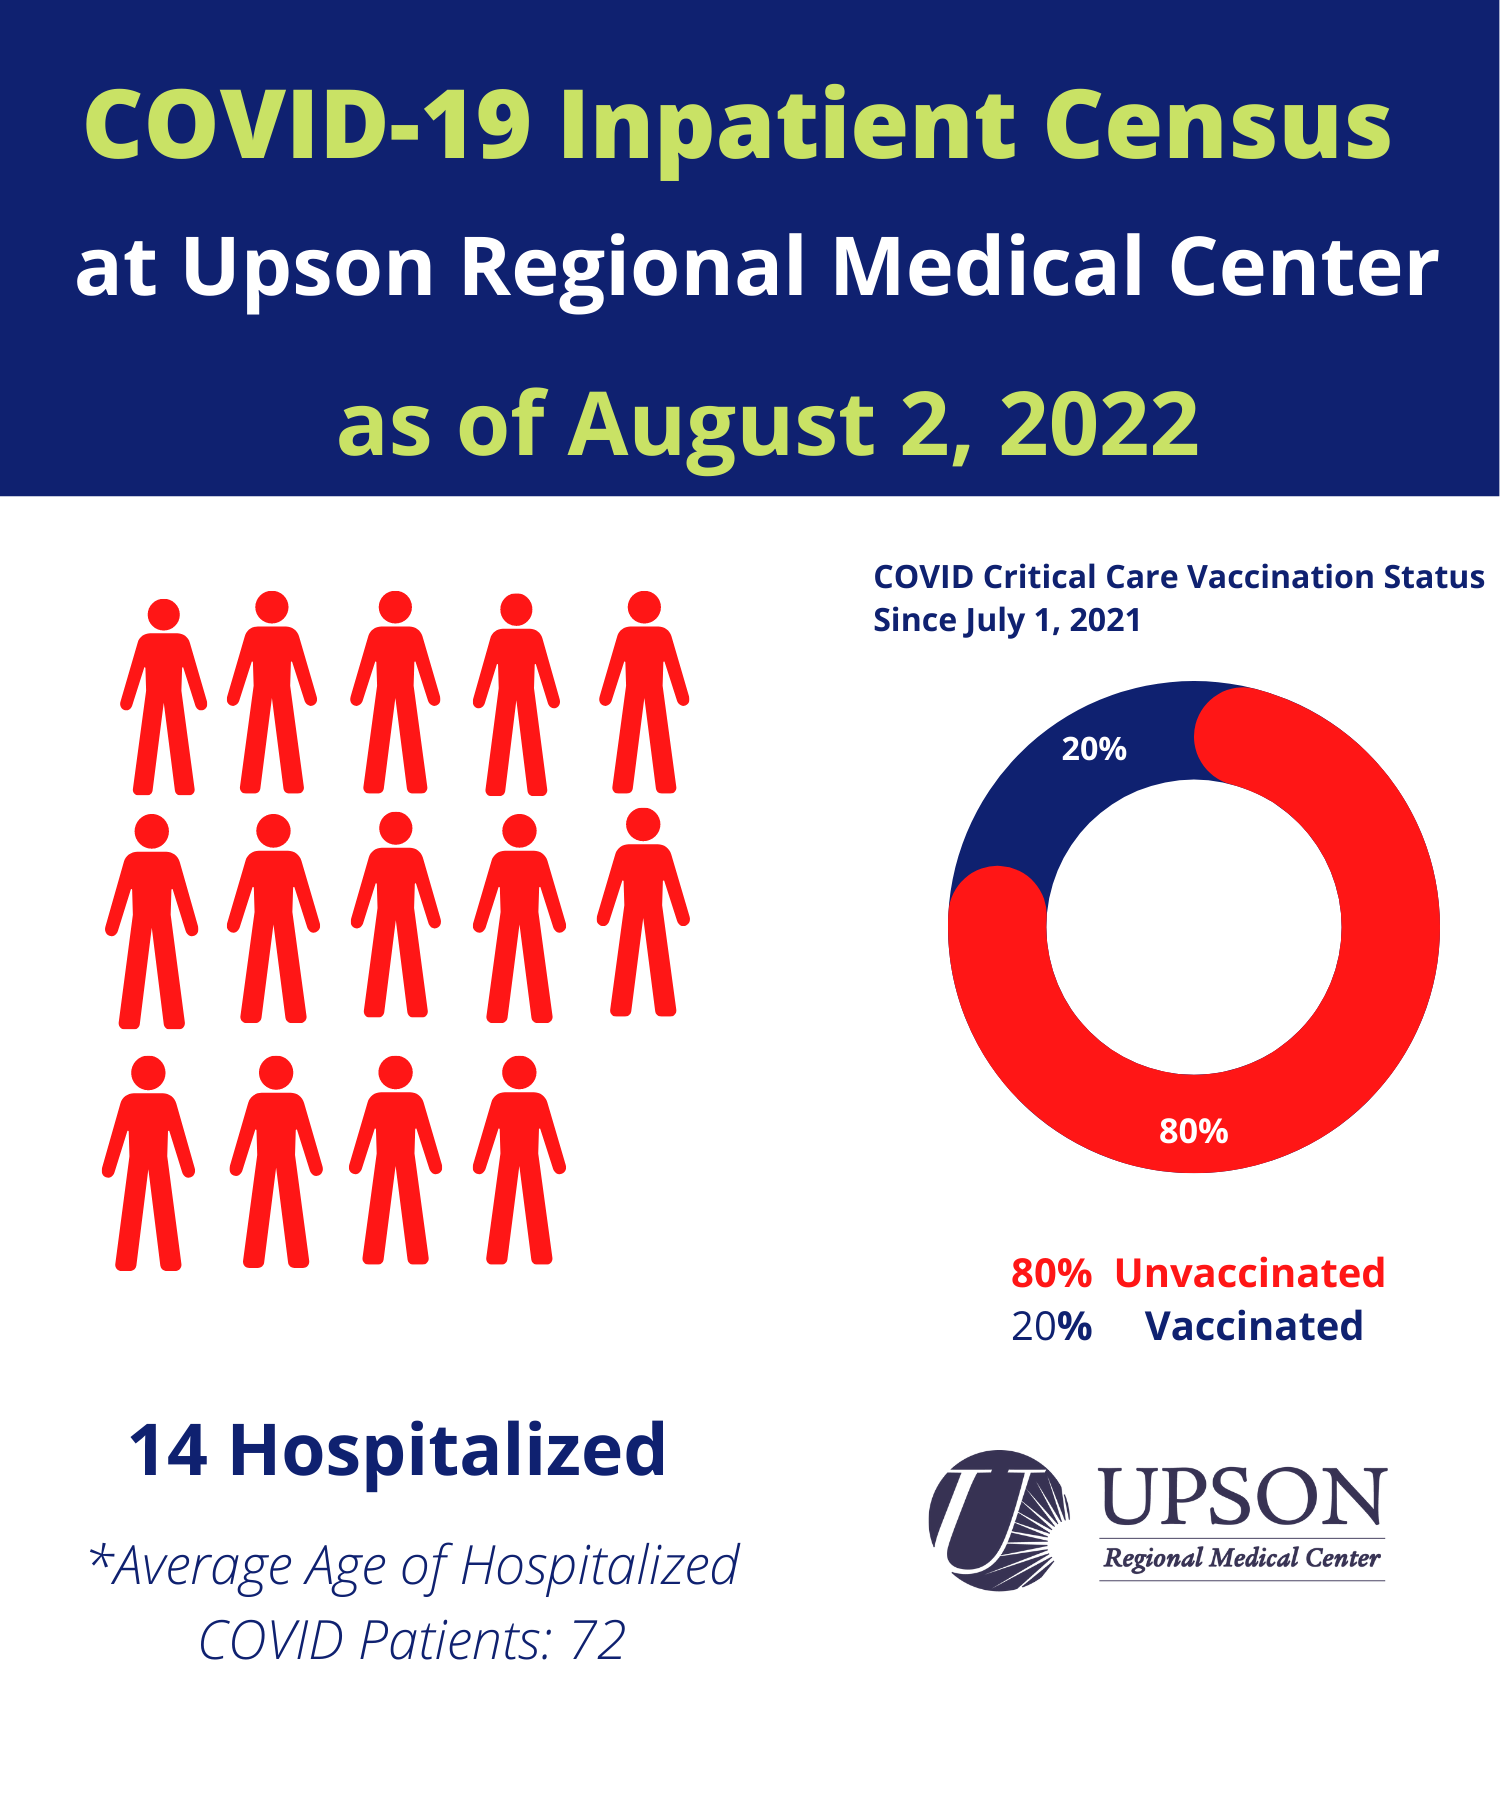 Photo for URMC COVID-19 Inpatient Status as of August 2, 2022